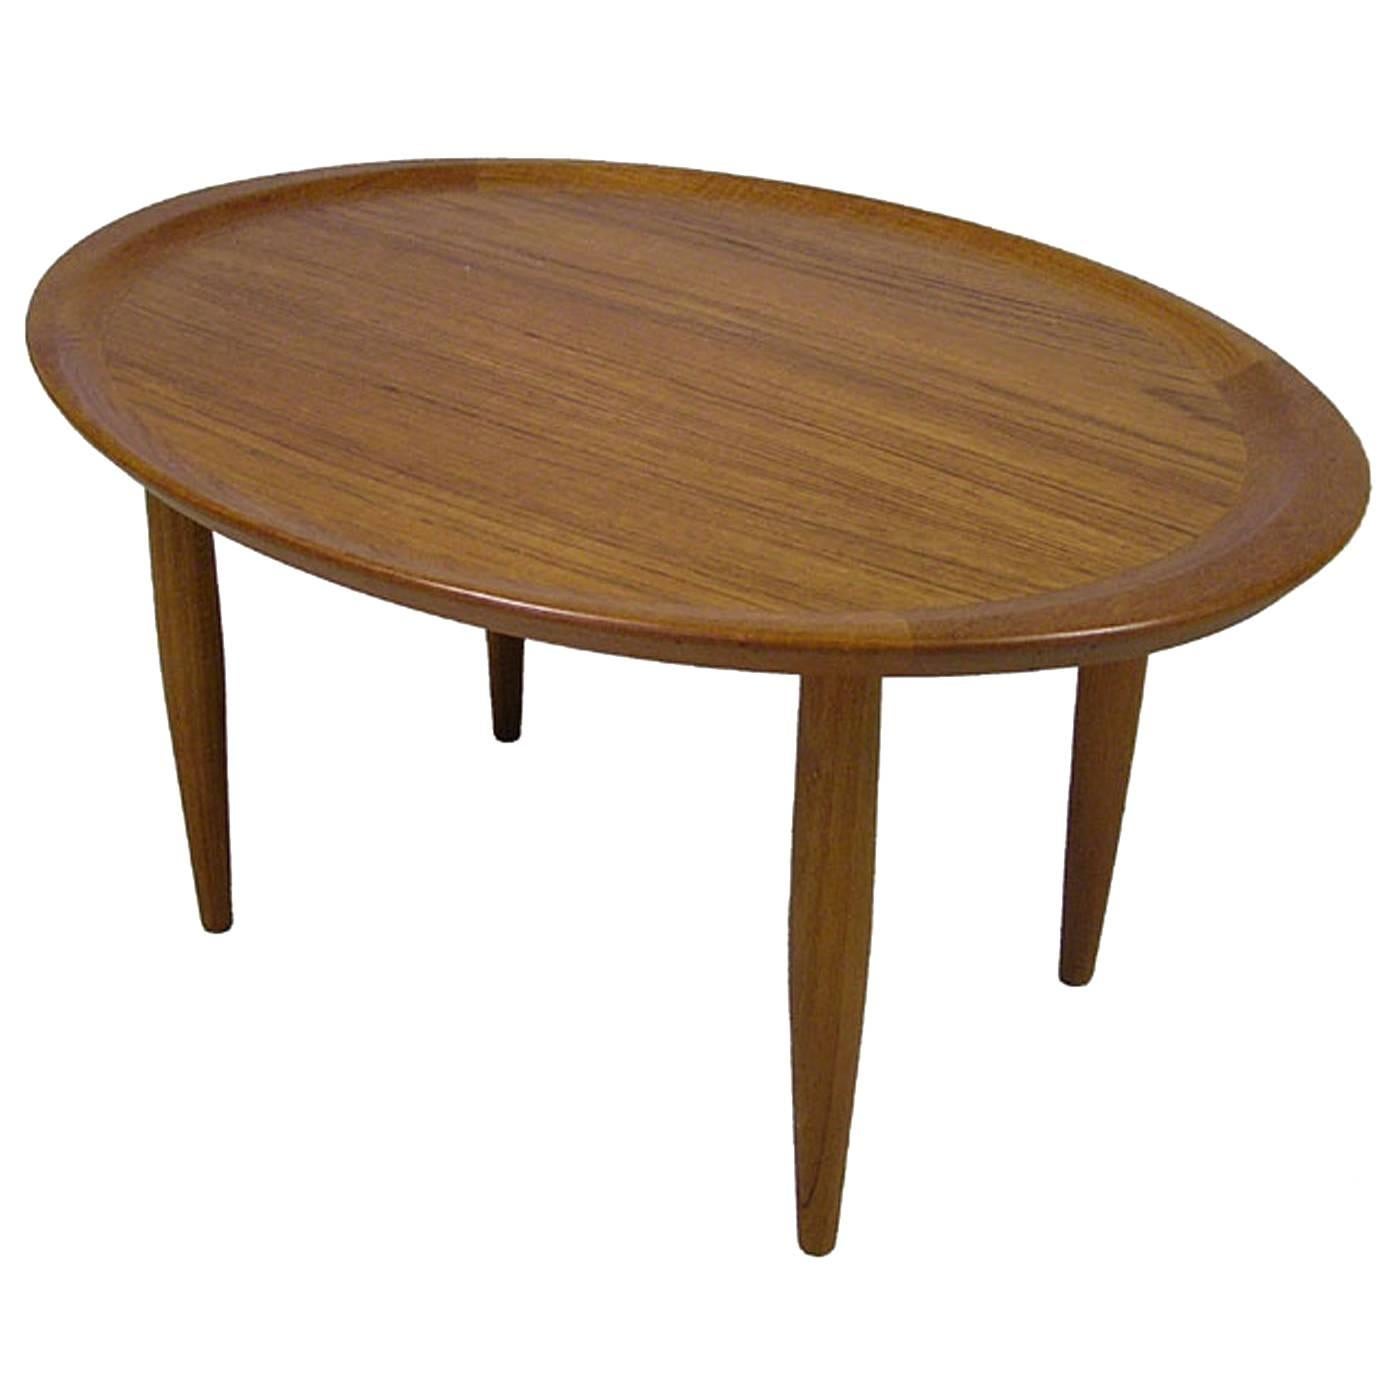 1960s Oval Teak Occasional or Side Table, Denmark For Sale